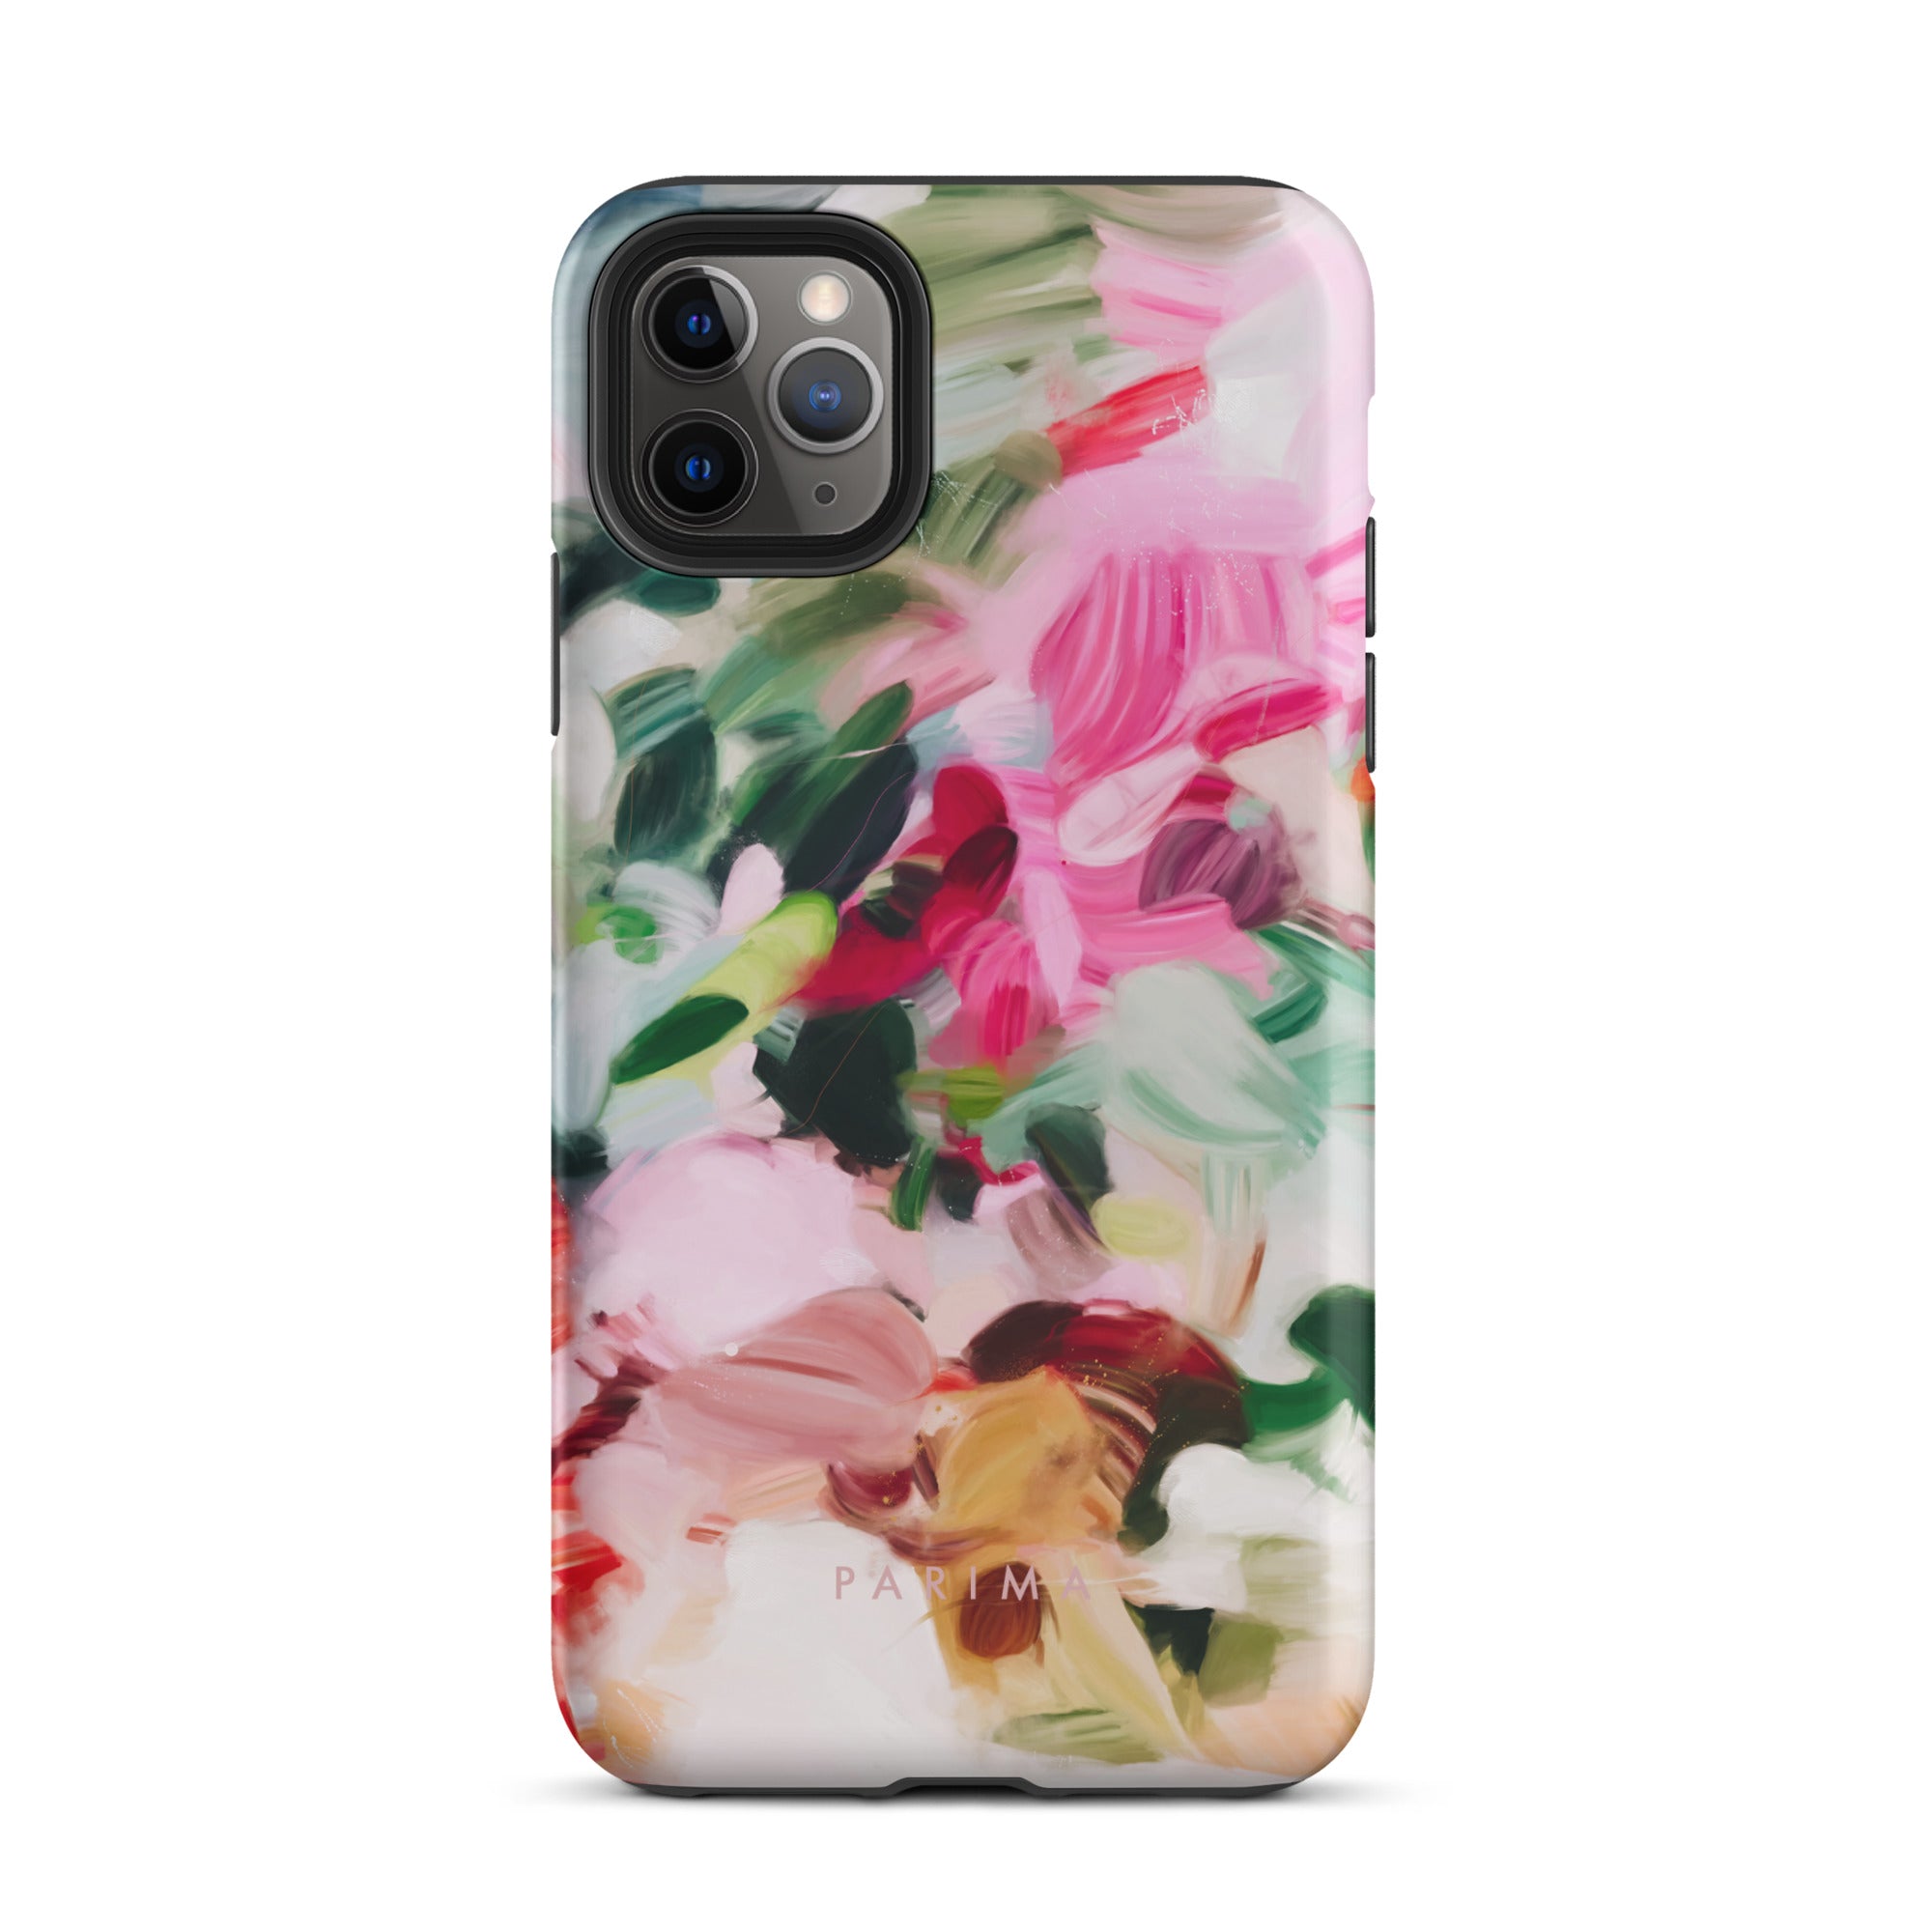 Bloom, pink and green abstract art - iPhone 11 Pro Max tough case by Parima Studio